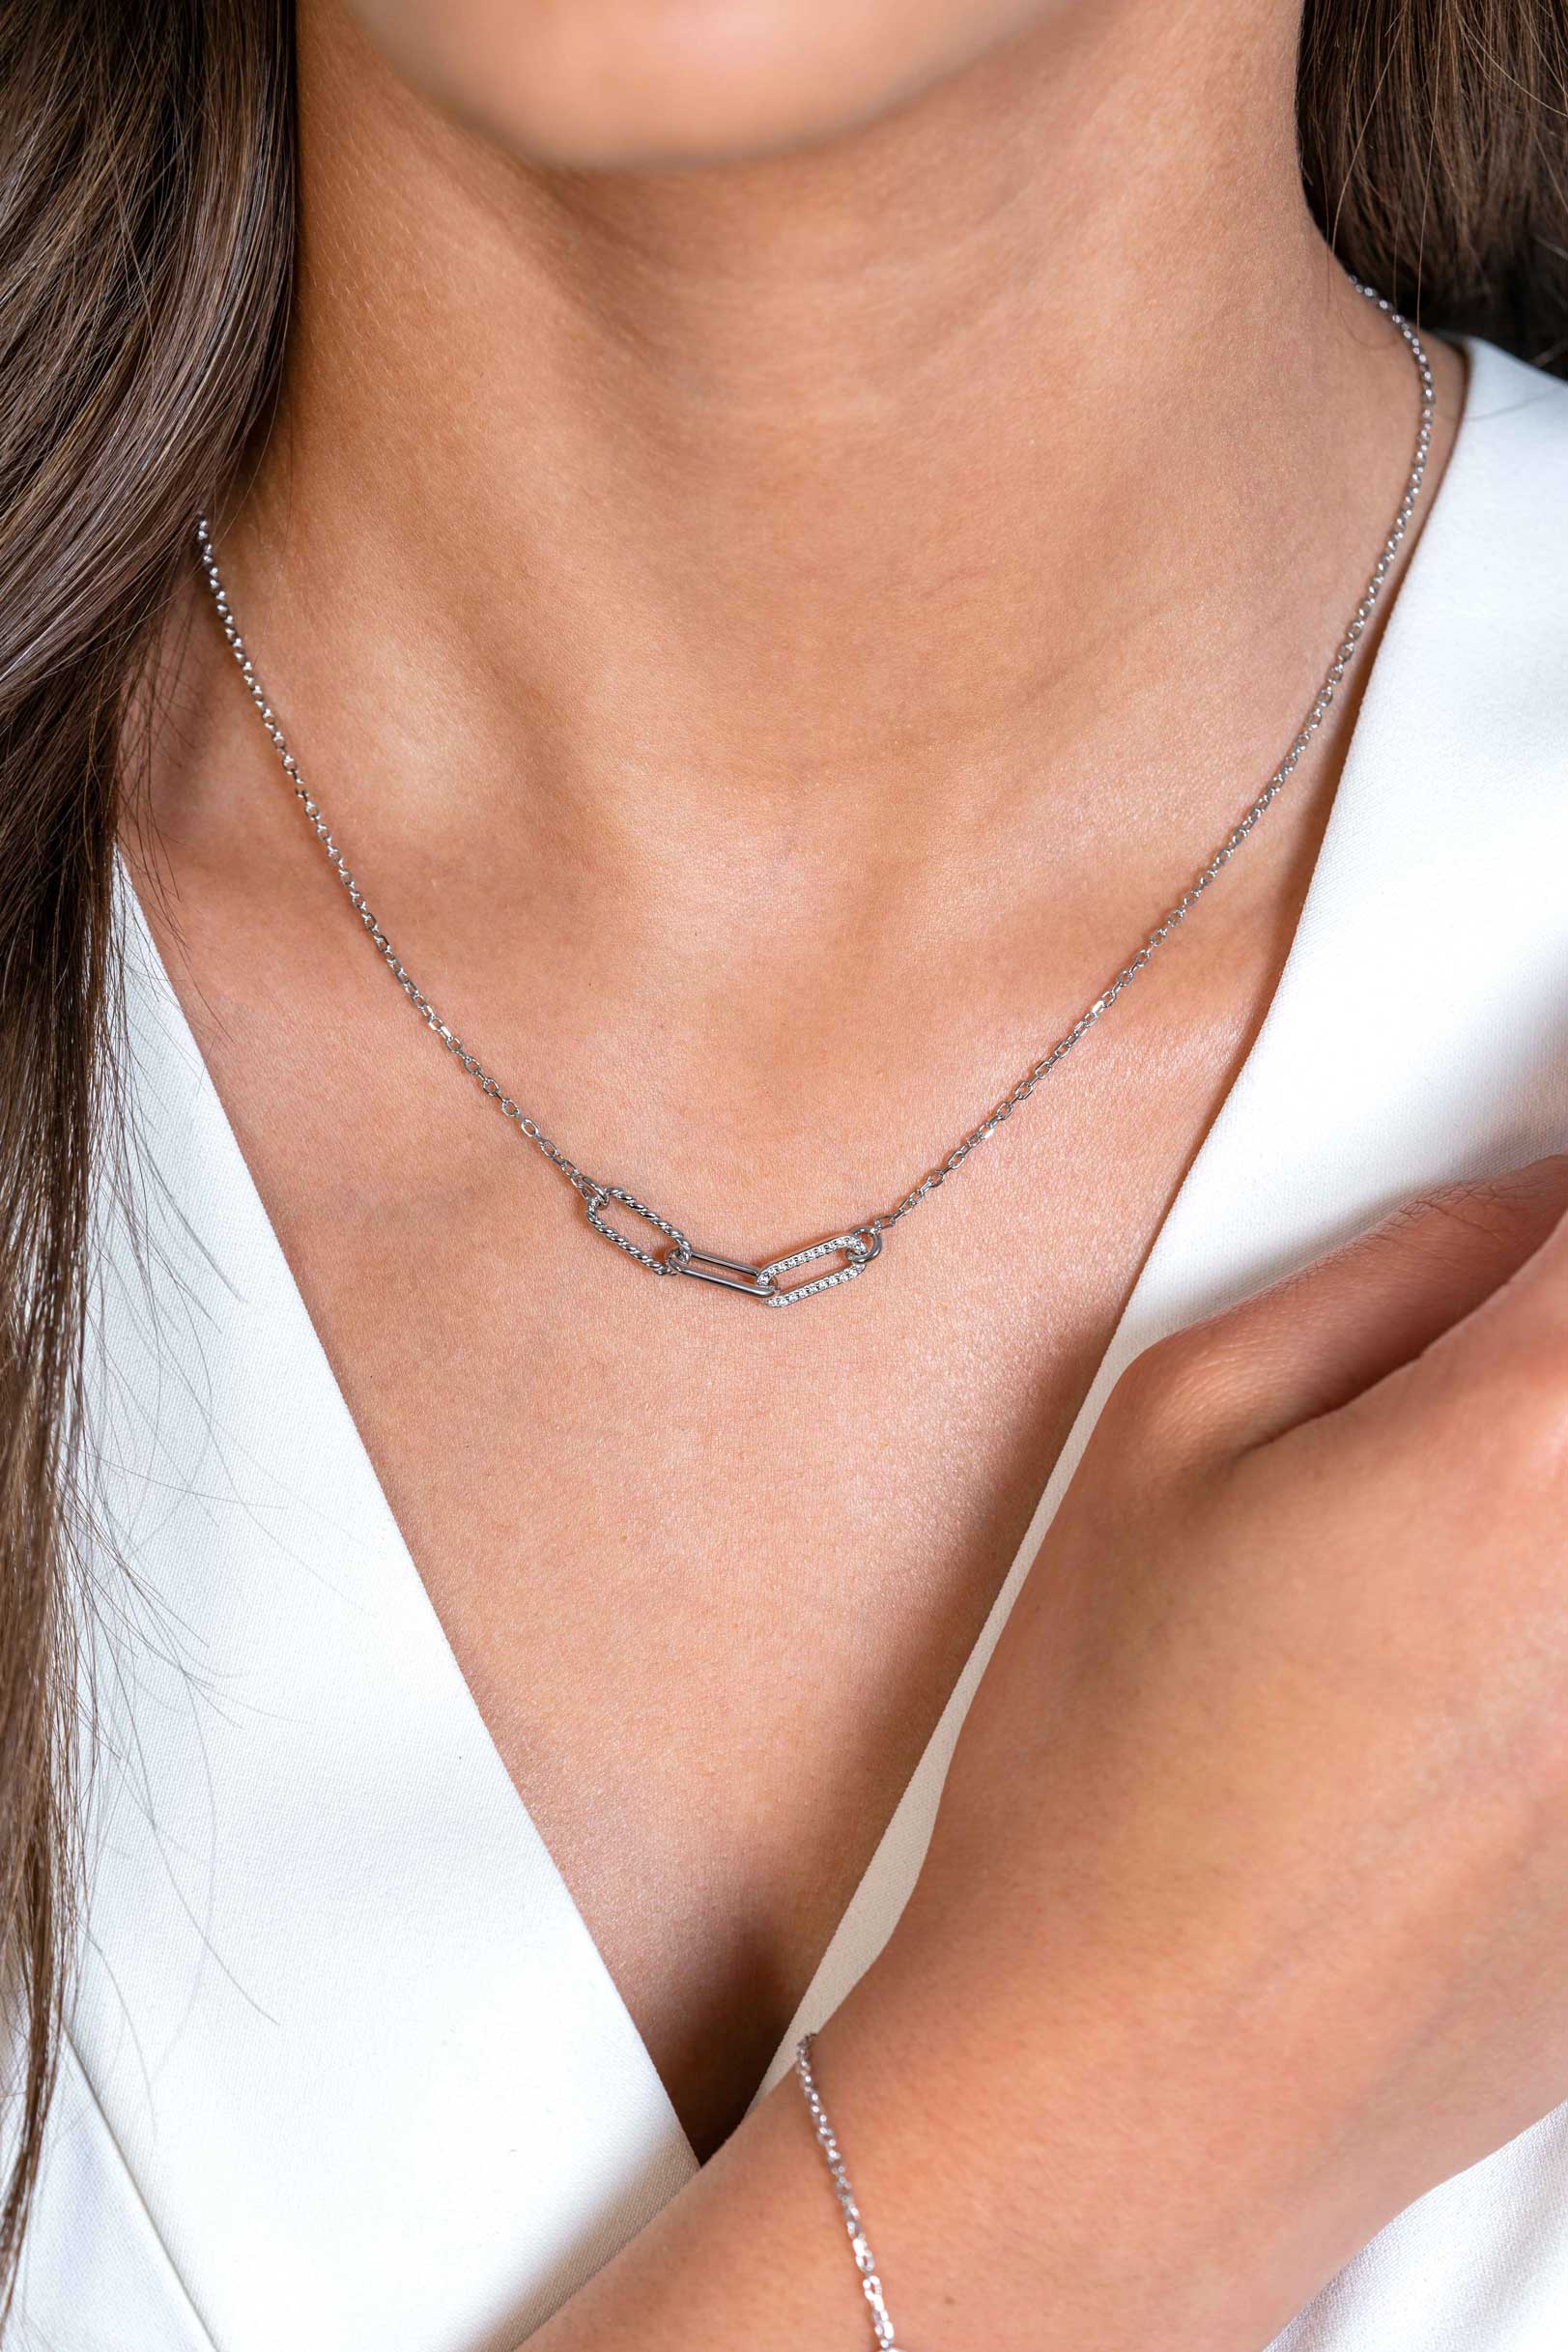 "ZINZI Sterling Silver Chain Necklace with 3 larger Paperclip Chains